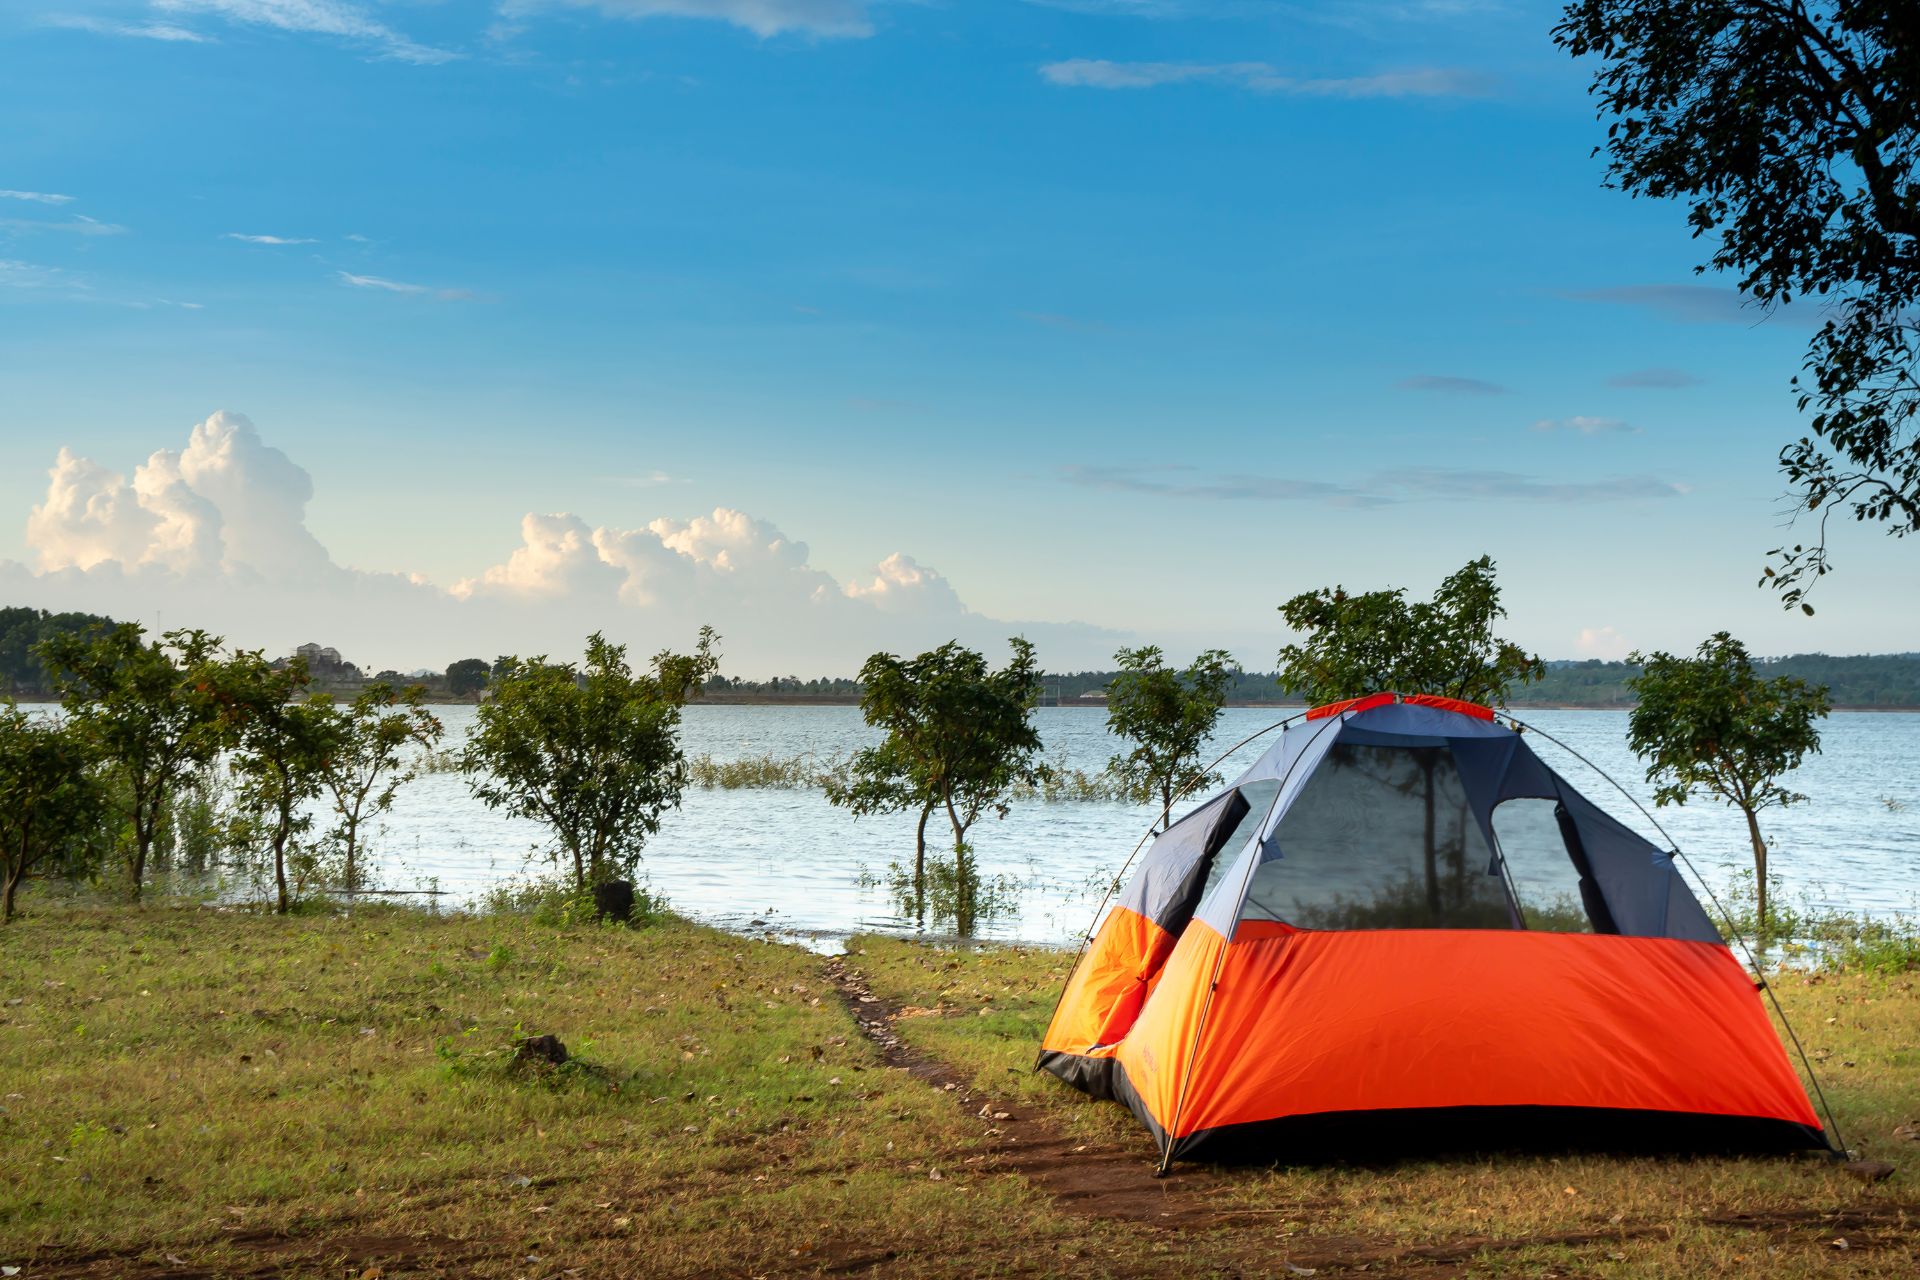 Sportshare Camping Tent: Trusted Gear